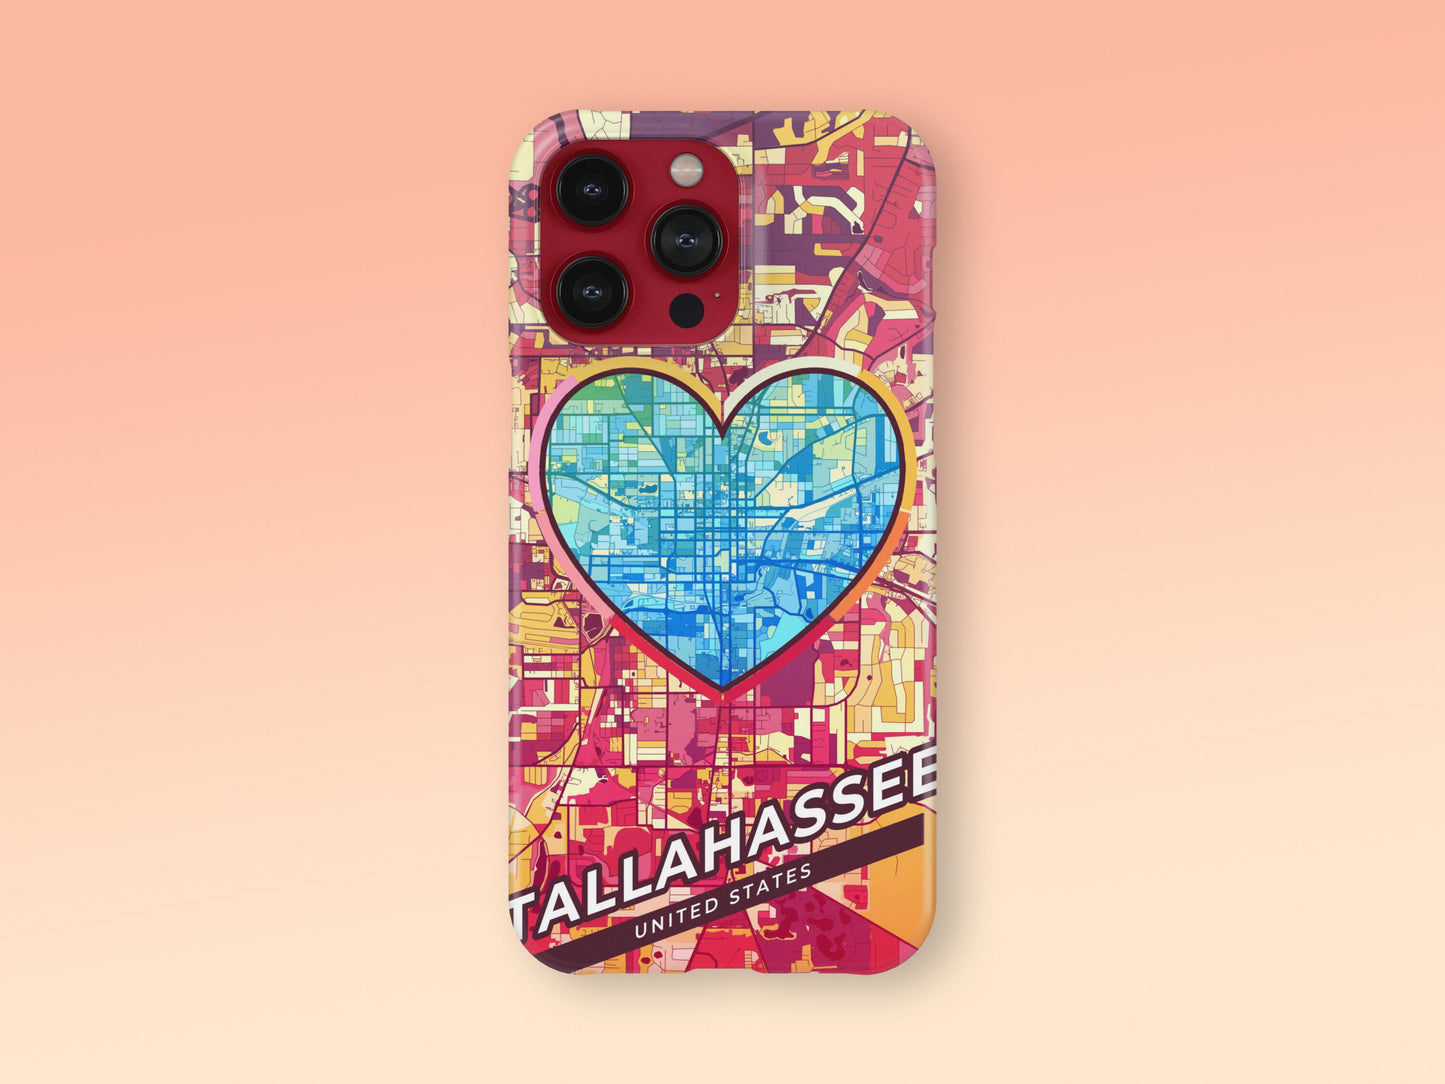 Tallahassee Florida slim phone case with colorful icon 2